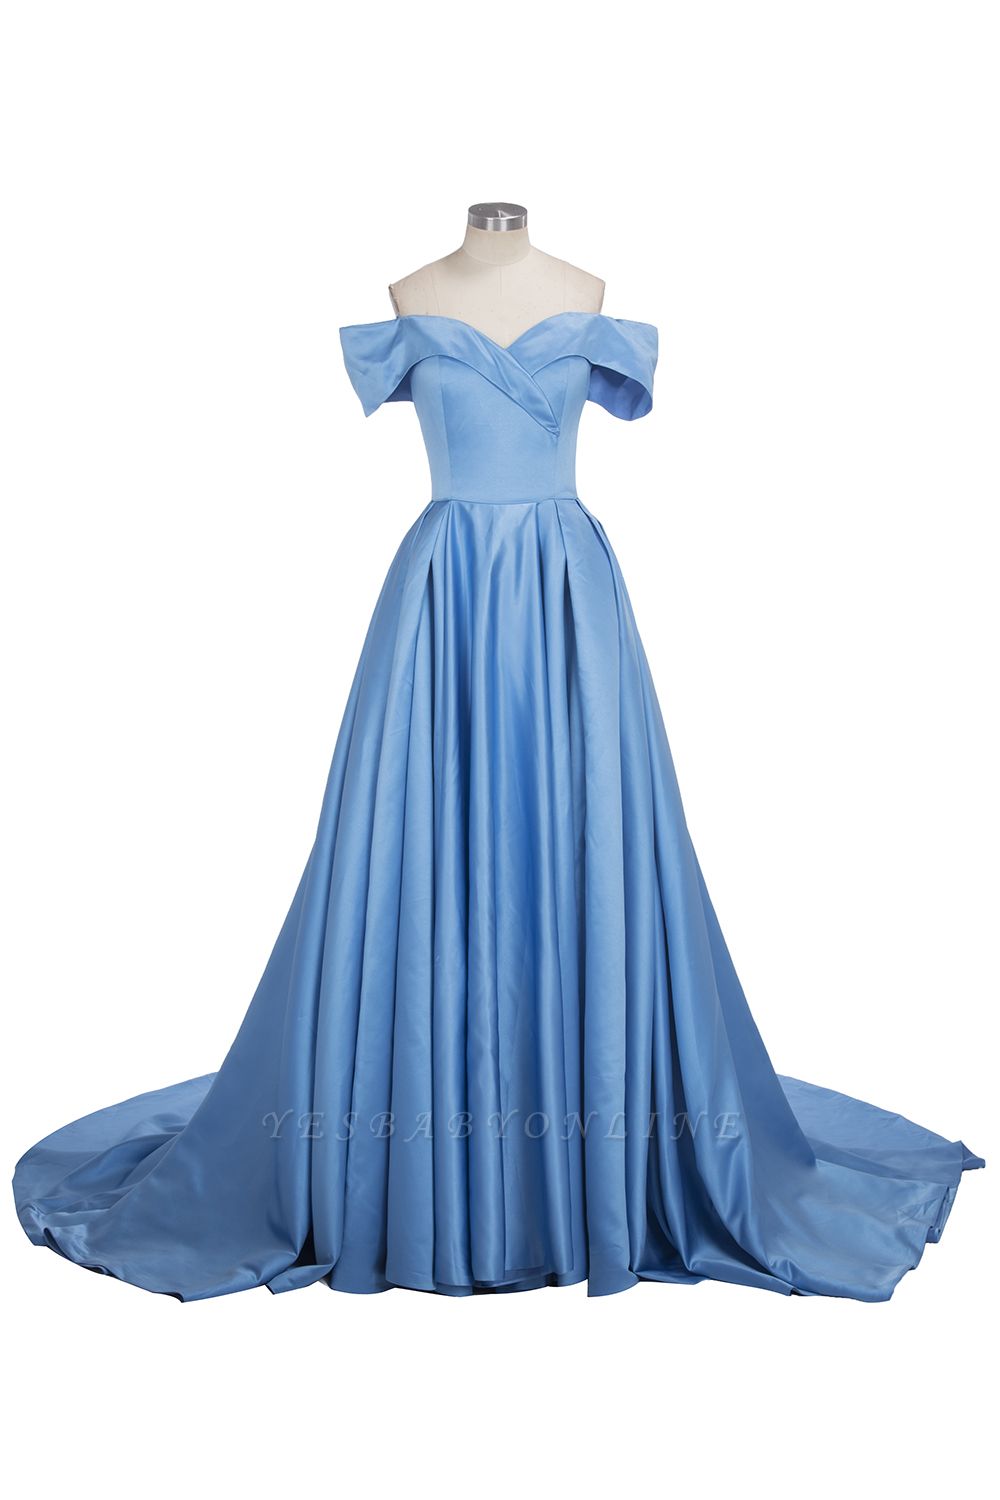 Sexy Sky Blue Prom Dresses Off-the-Shoulder Side Slit Gorgeous Evening Gowns